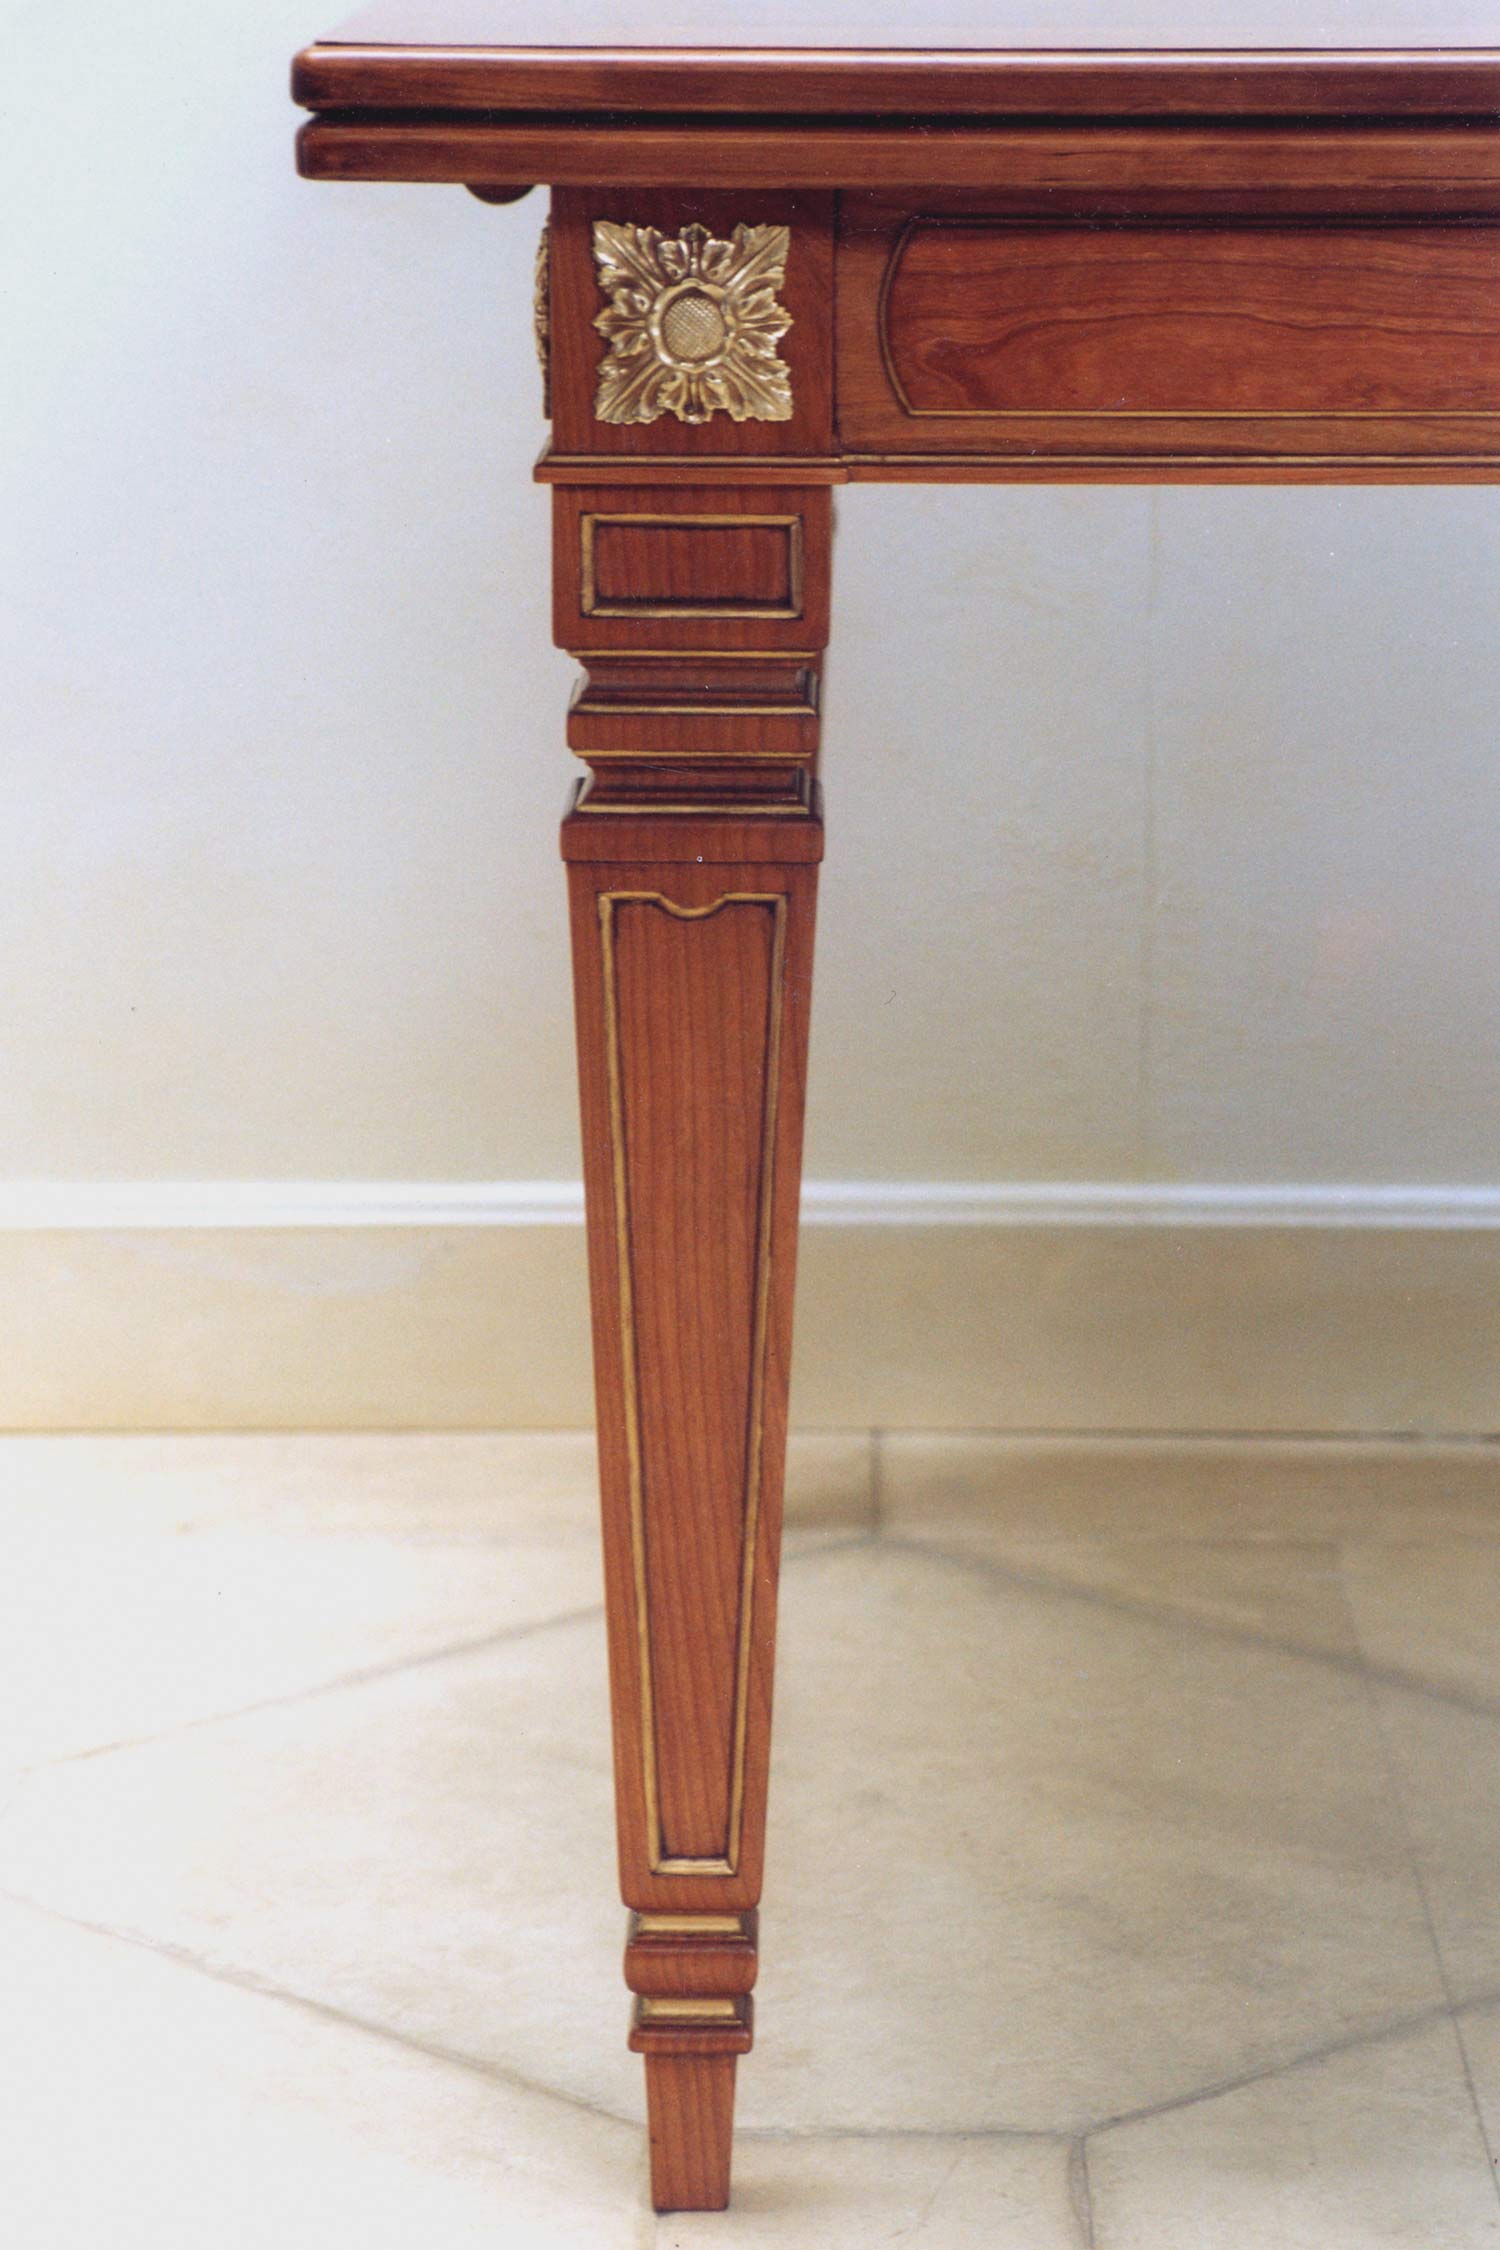 7 French Provincial cherry-wood furniture by Jean-Christophe Burckhardt